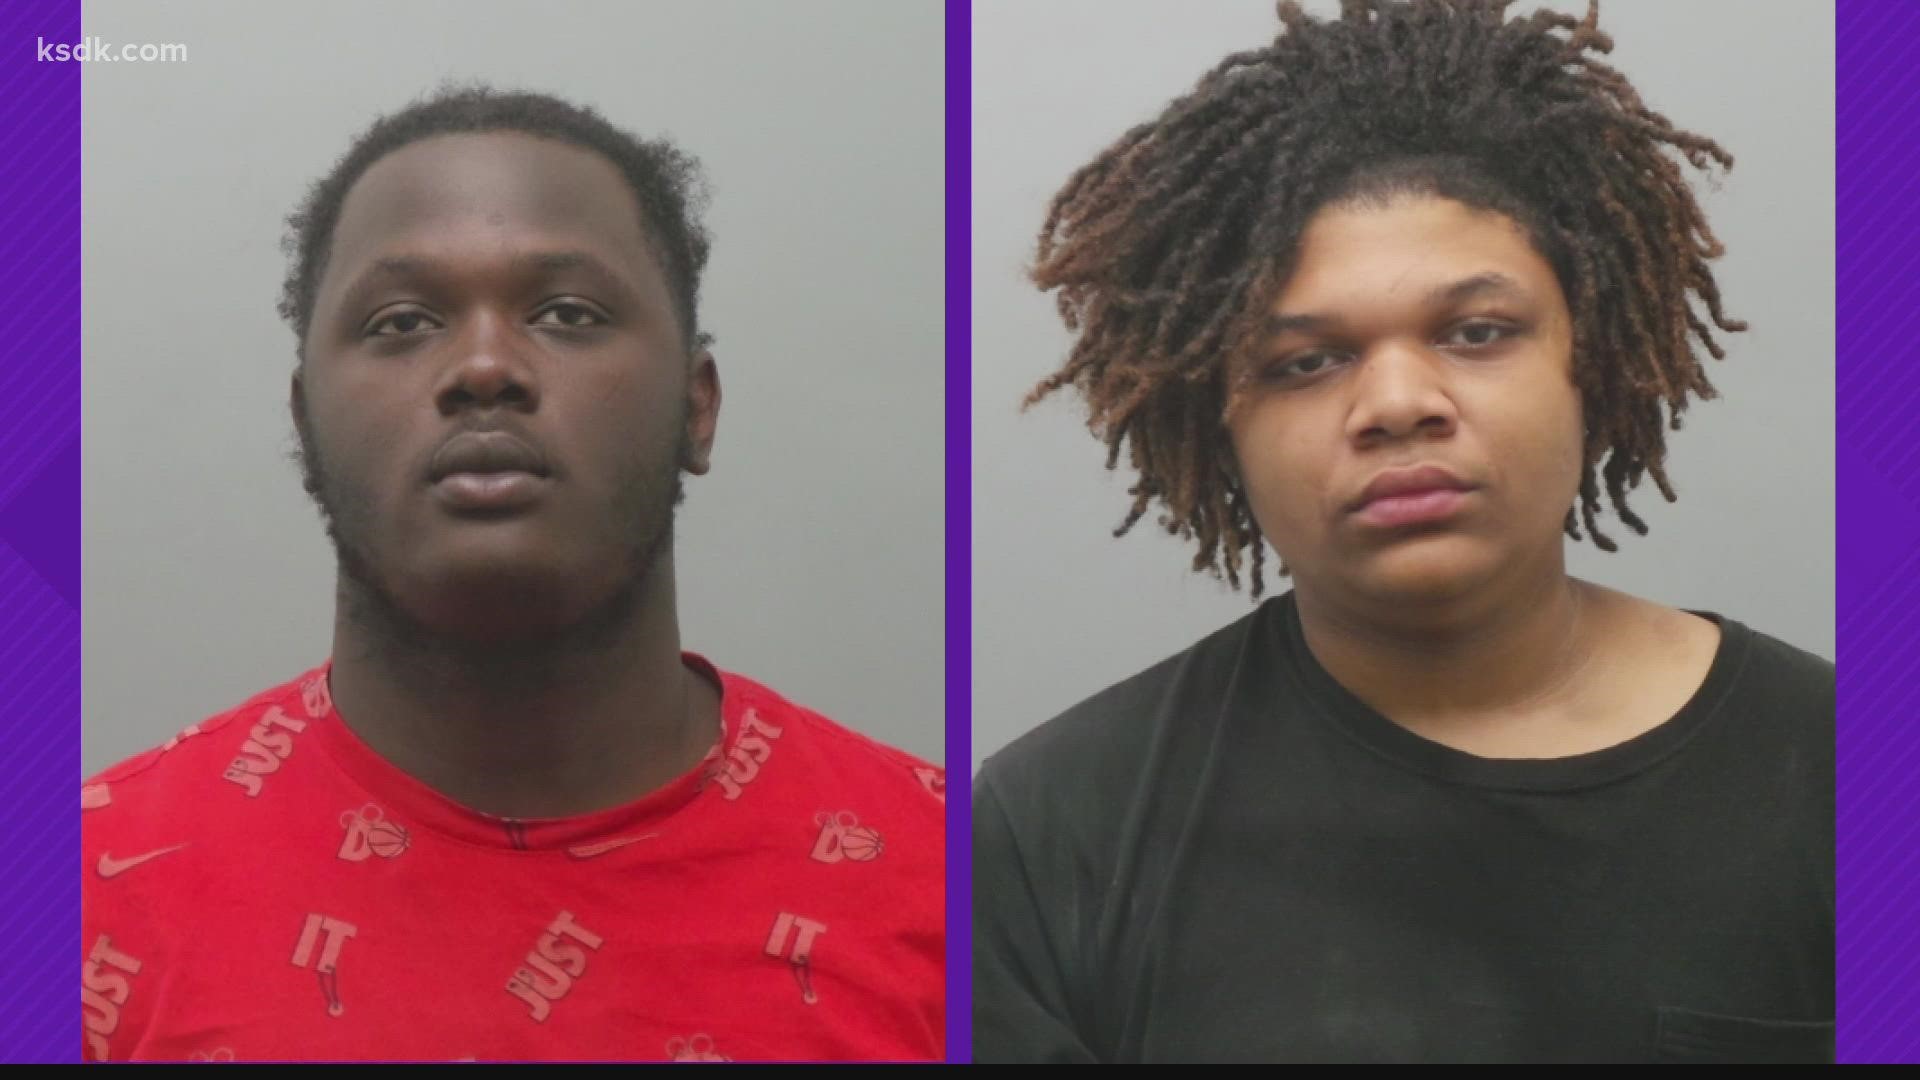 Jeremiah Allen and Tywon Harris were charged with murder in connection with the deadly shooting on the Hazelwood Central High School parking lot.